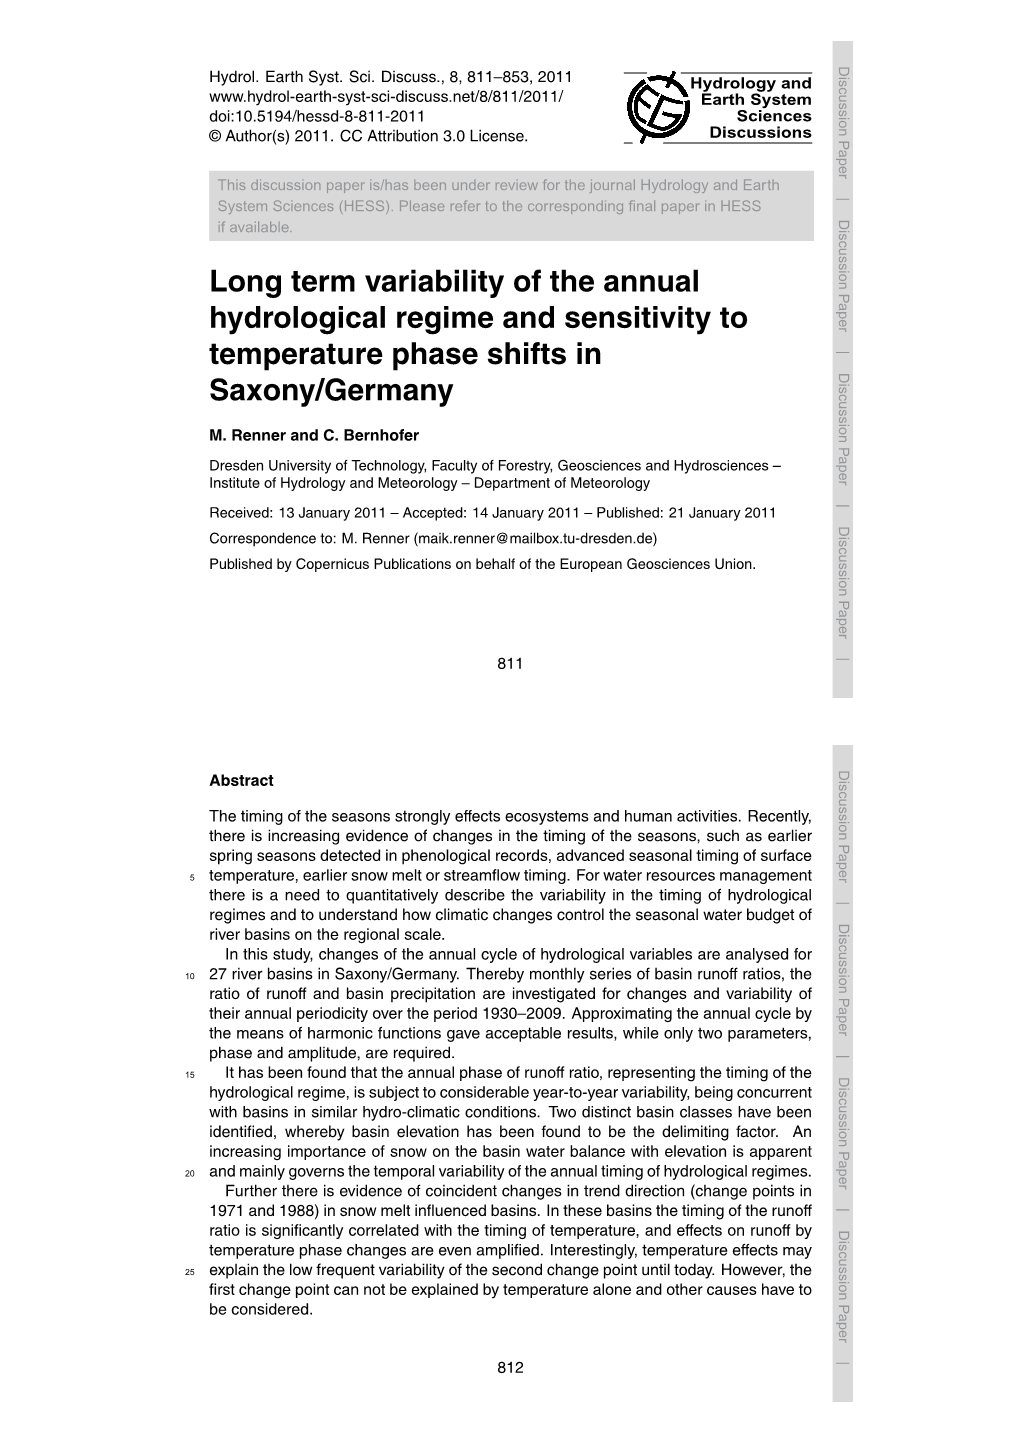 Long Term Variability of the Annual Hydrological Regime and Sensitivity